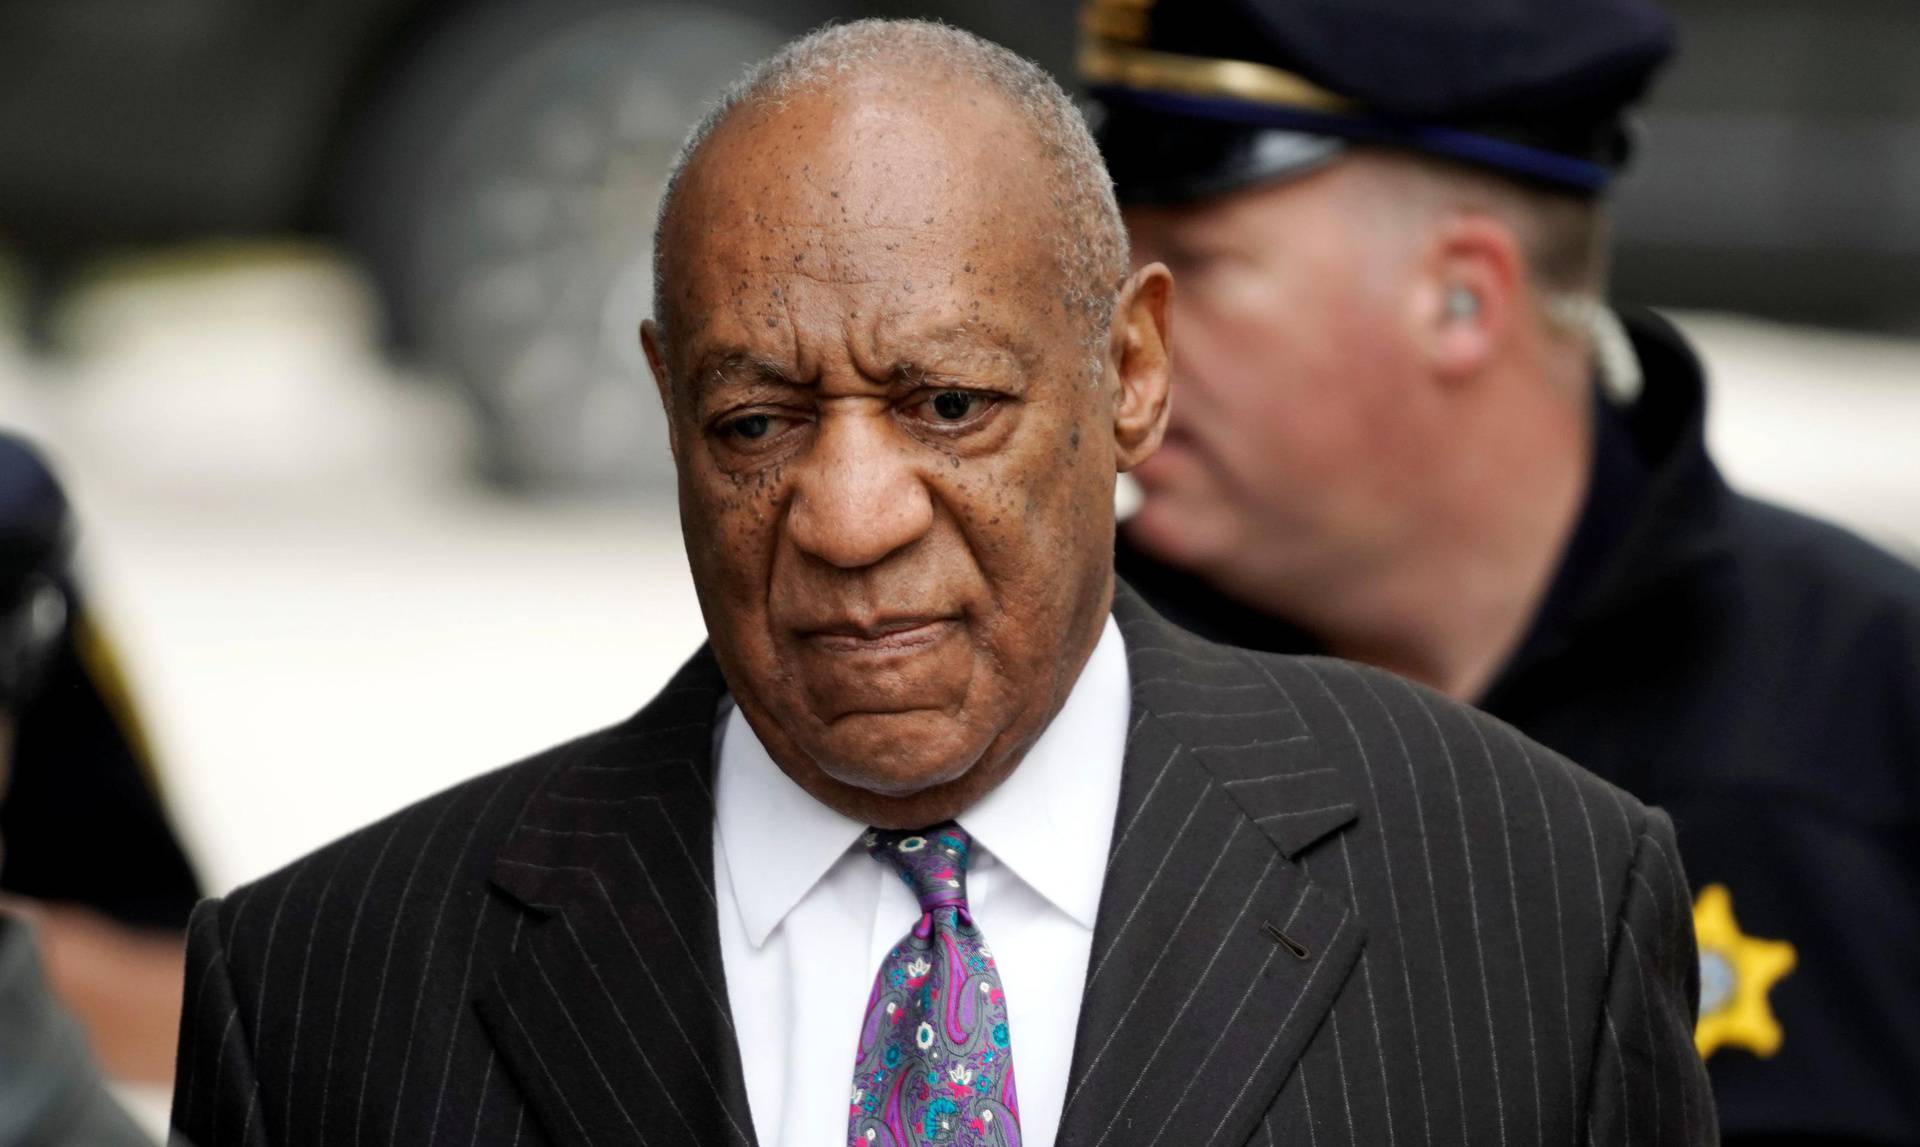 Actor and comedian Bill Cosby arrives for first day of retrial at the Montgomery County Courthouse in Norristown, Pennsylvania